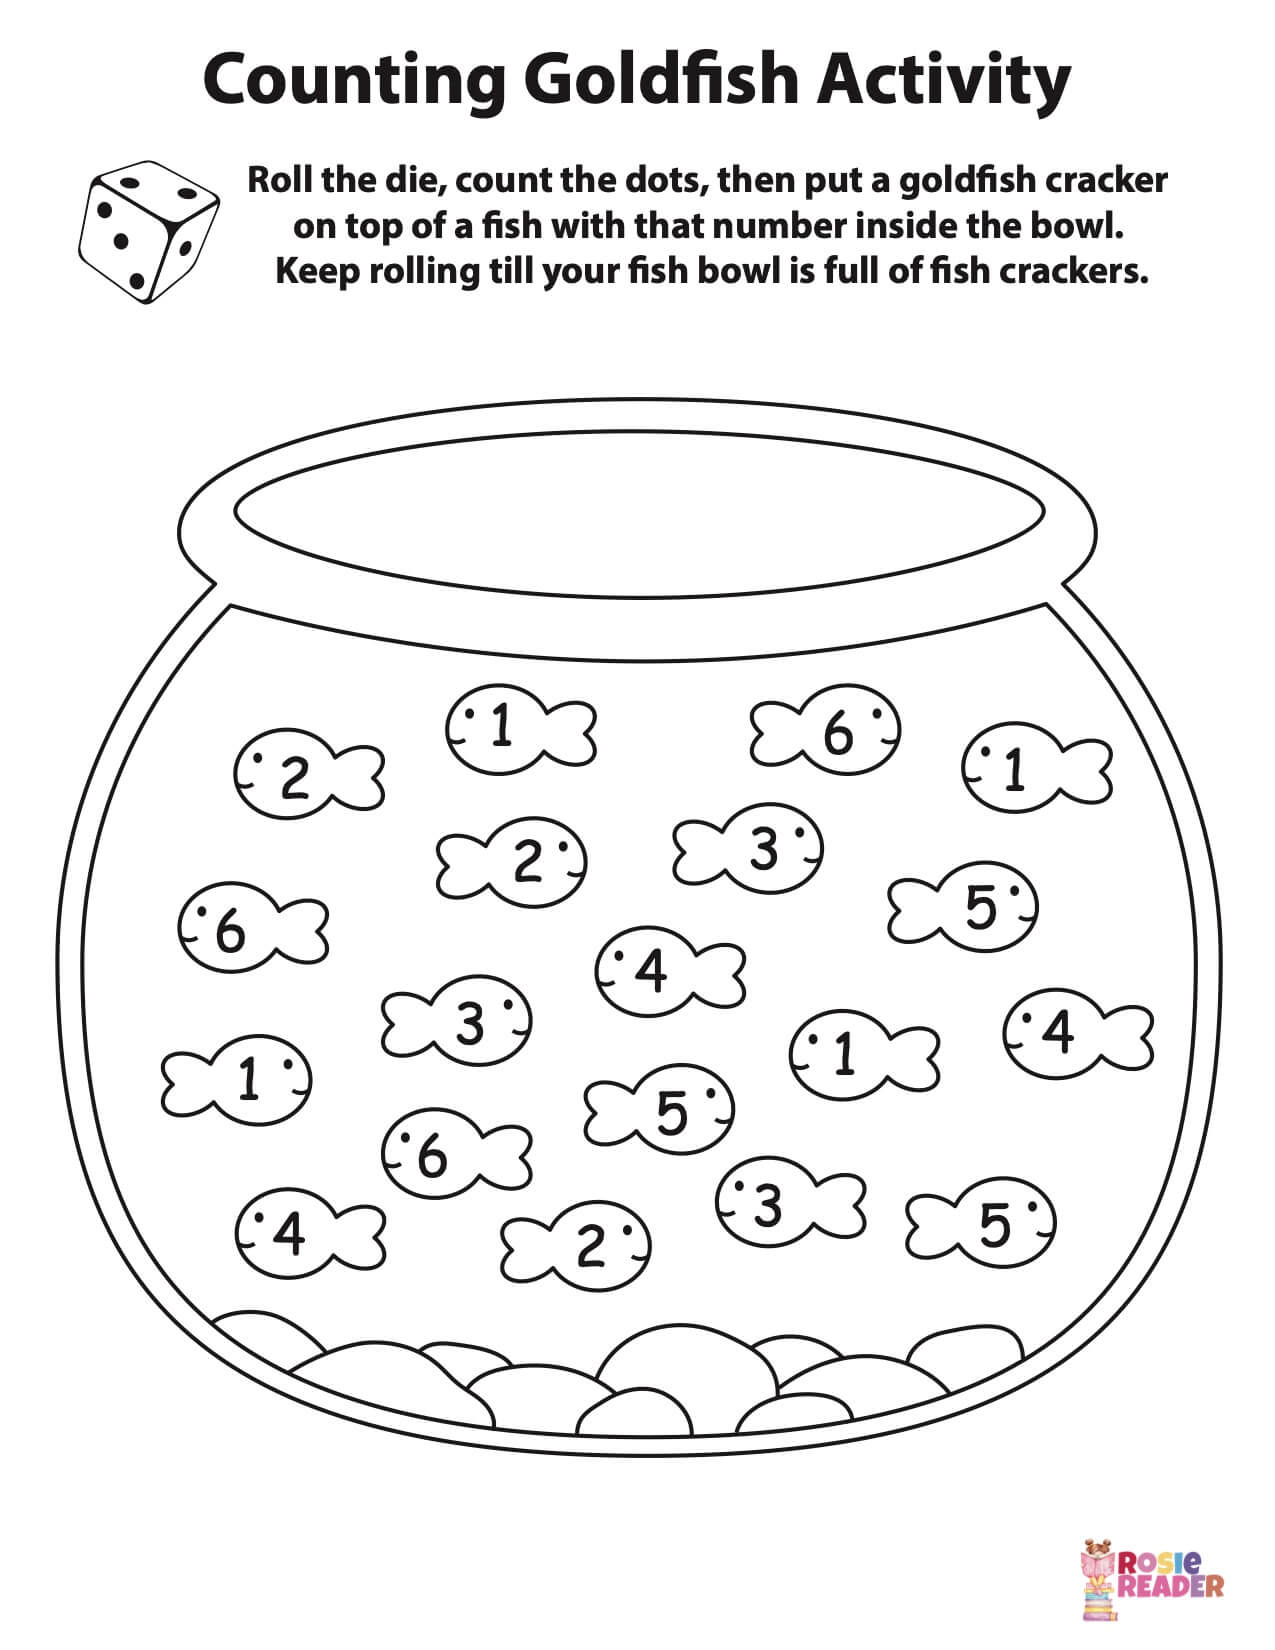 Counting Goldfish Activity & Printable Die Reading adventures for